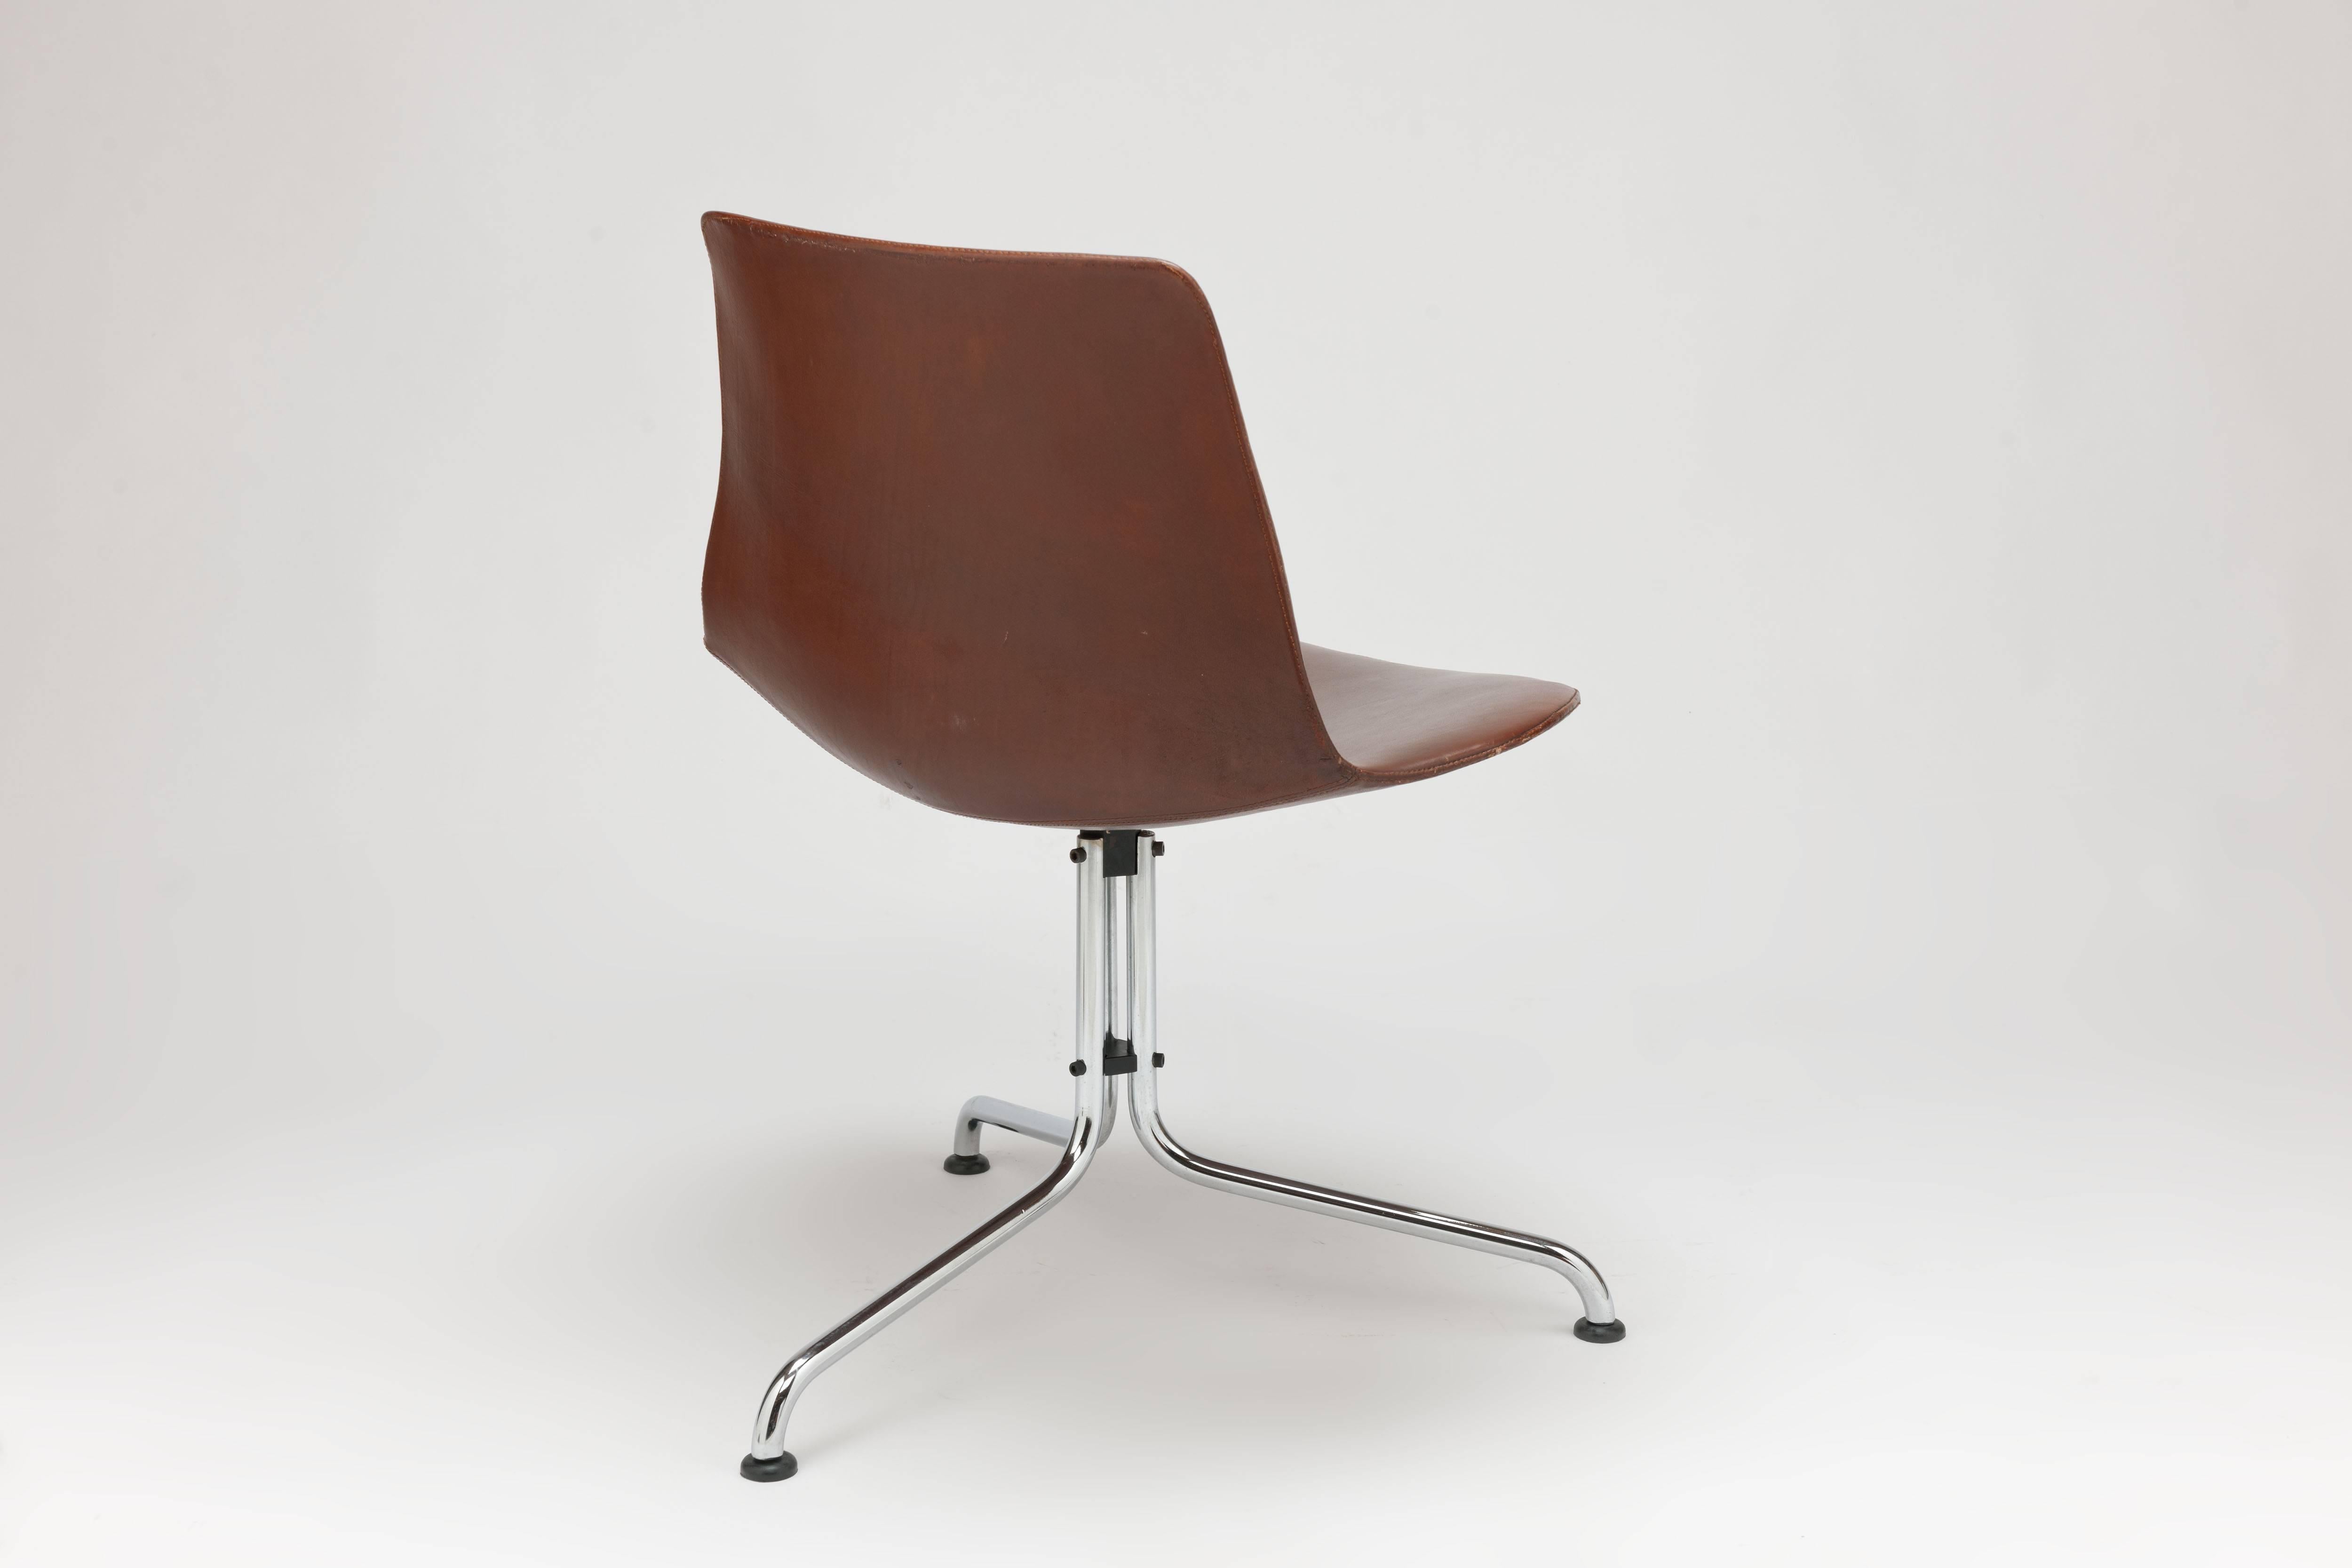 Rare model BO611 swivel chair by Jorgen Kastholm & Preben Fabricius, manufactured by Bo-Ex Denmark mid-1960s.
Glass fibre shell with original brown leather upholstery on a tripod swivel base of chromed steel. 

Measures: Seat height 42 cm.